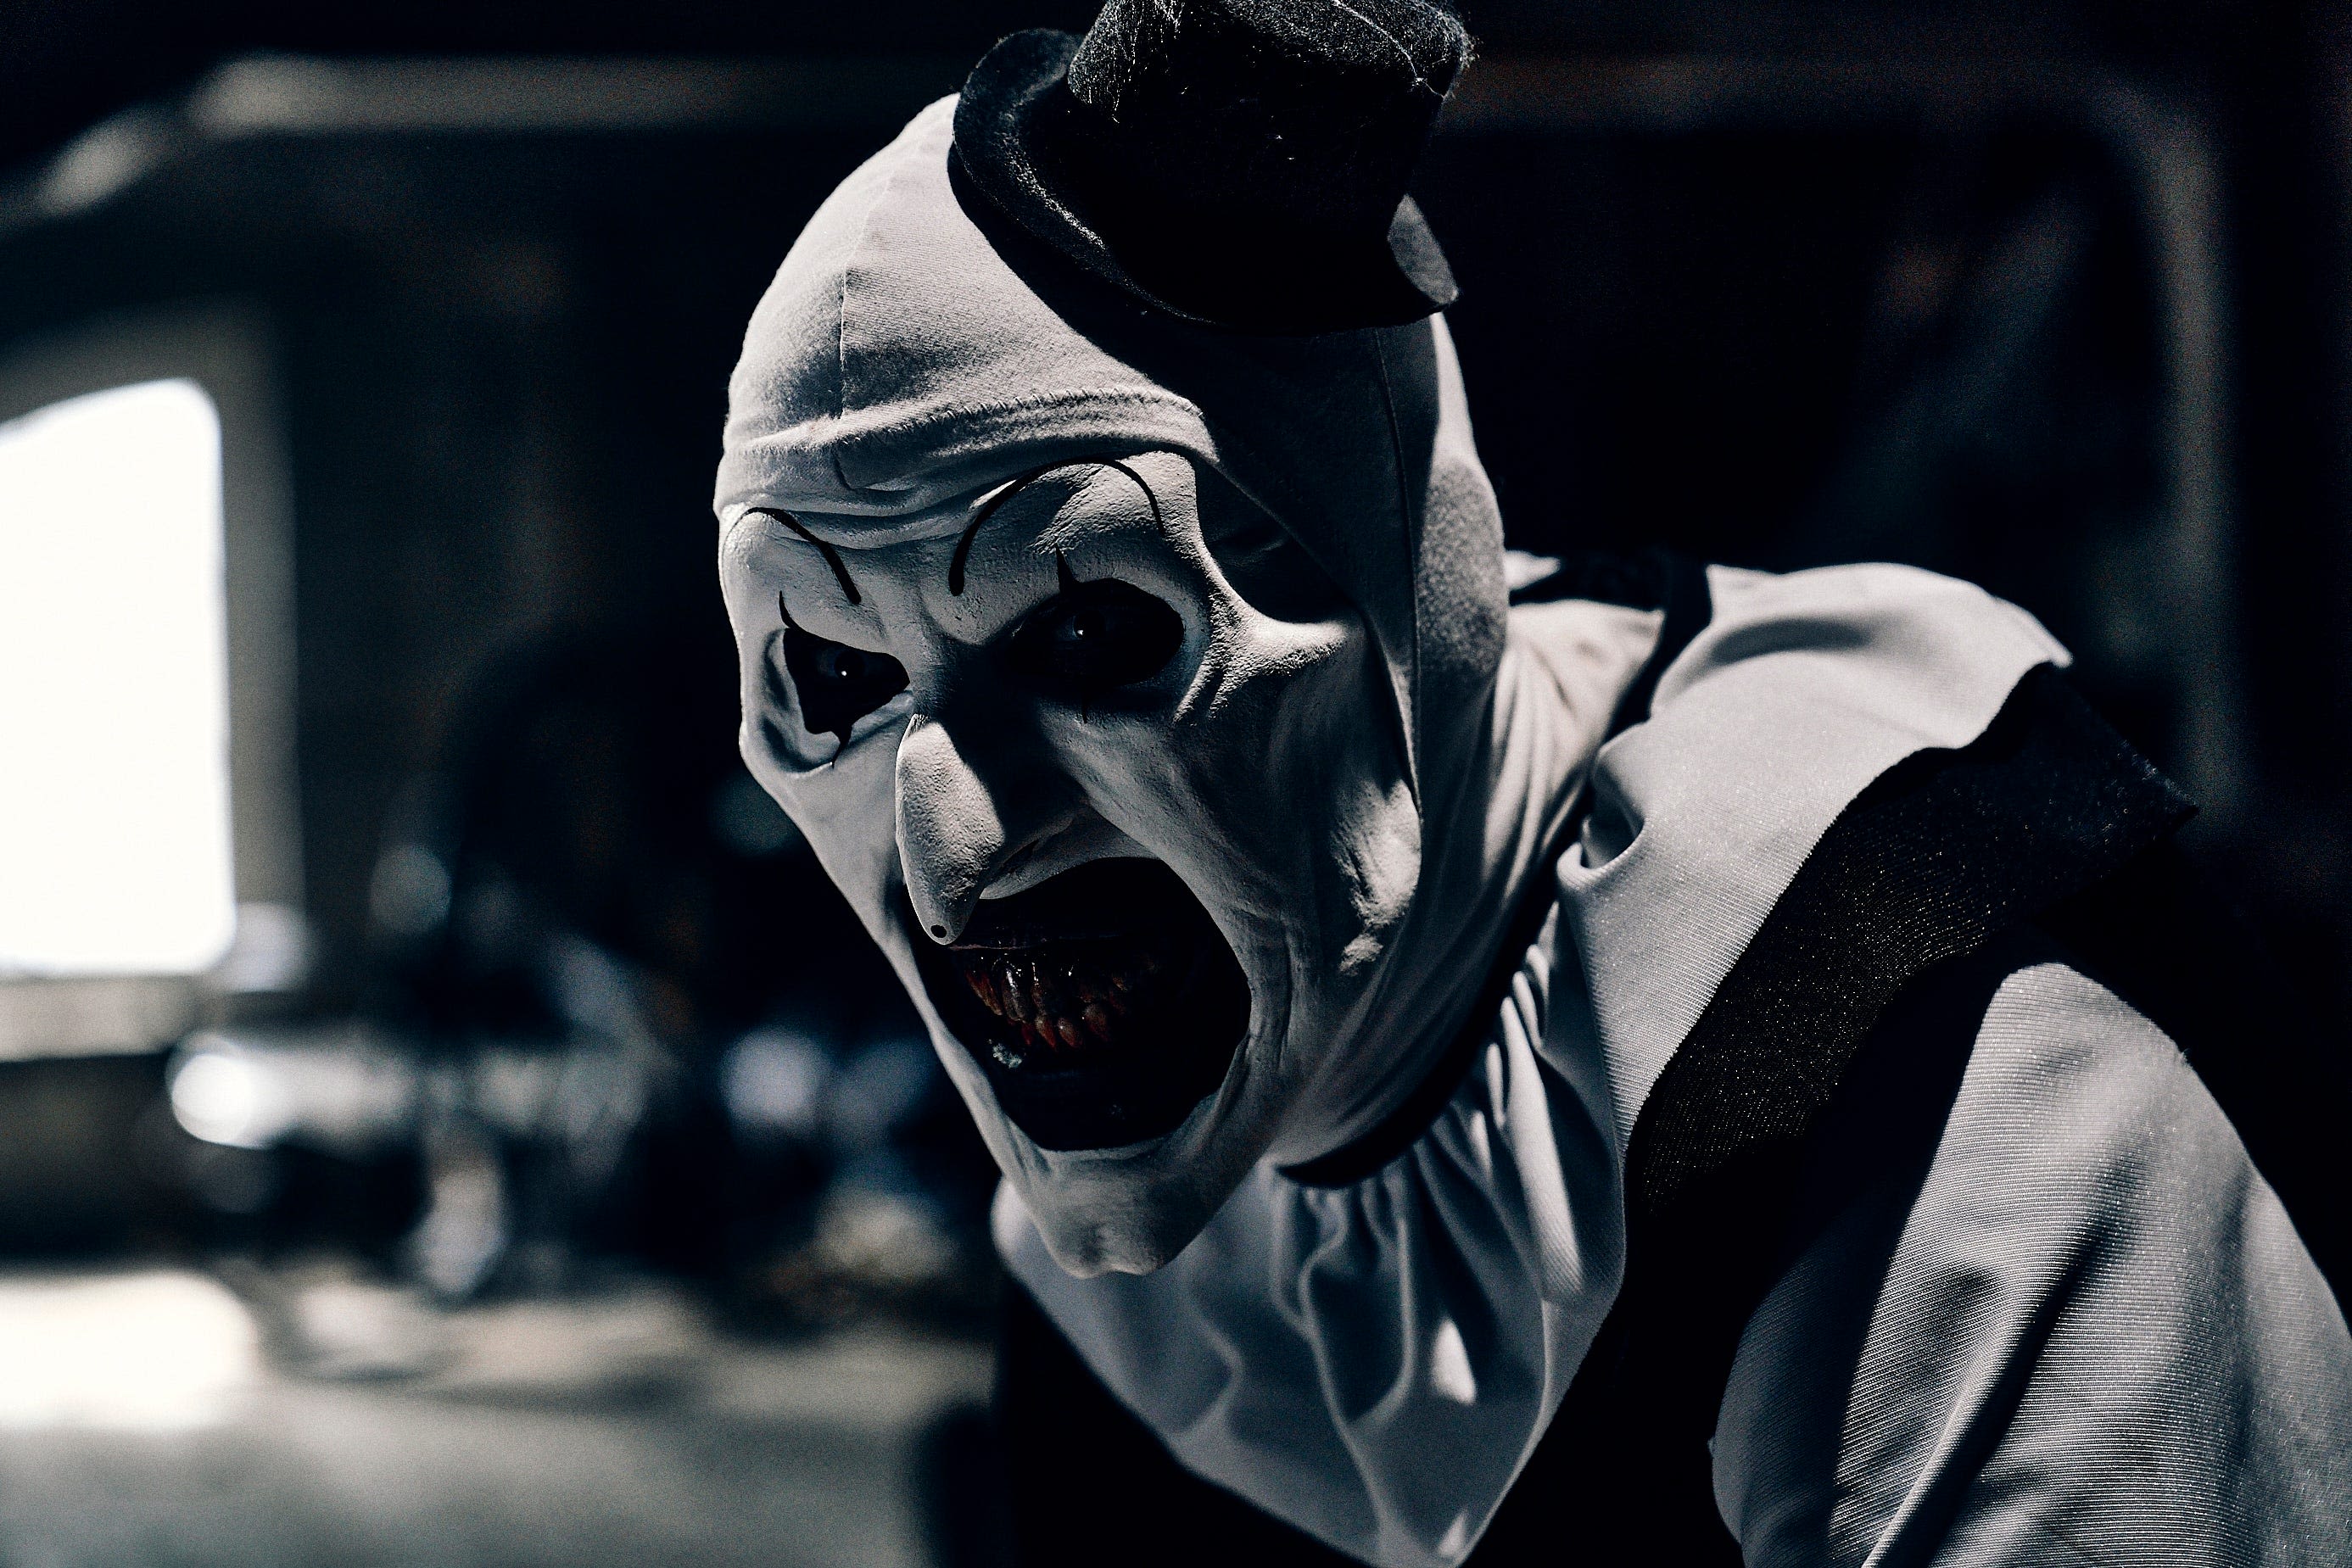 See exclusive new images of Art the Clown in gory Christmas horror movie 'Terrifier 3'